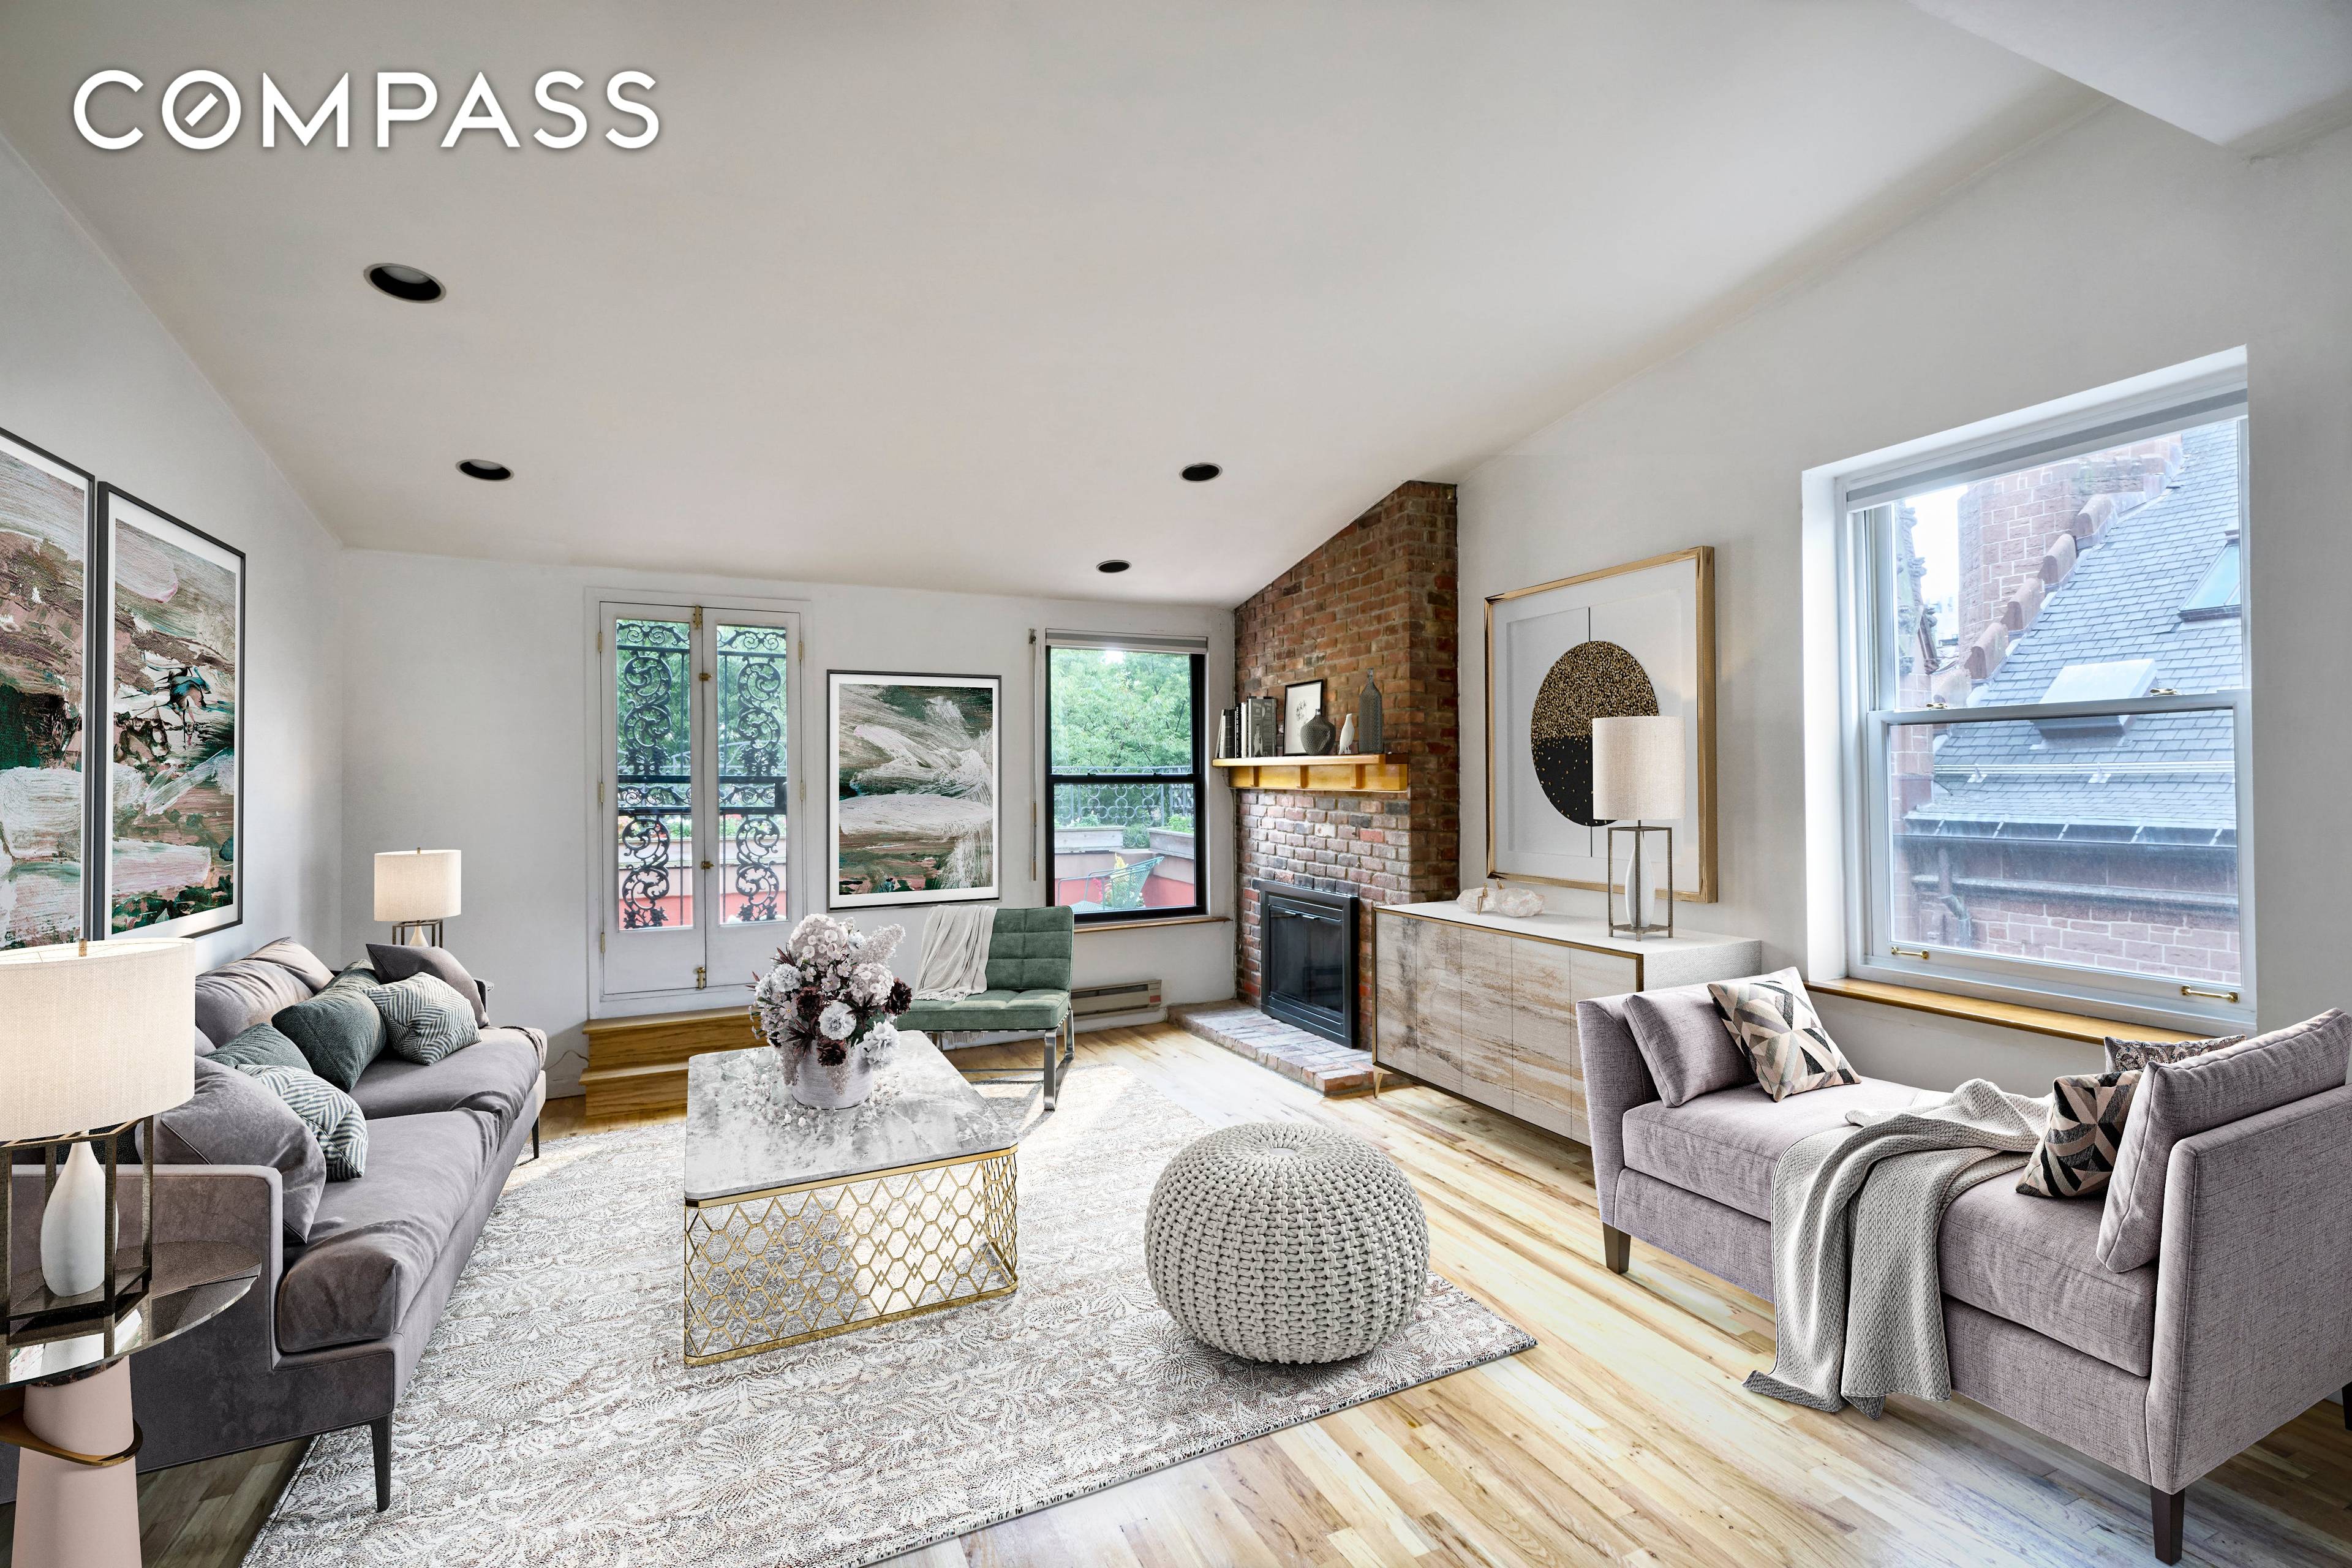 Introducing an elegant two bedroom, two bath home with two terraces and a wood burning fireplace in an elevator Co op in the heart of Brooklyn Heights.